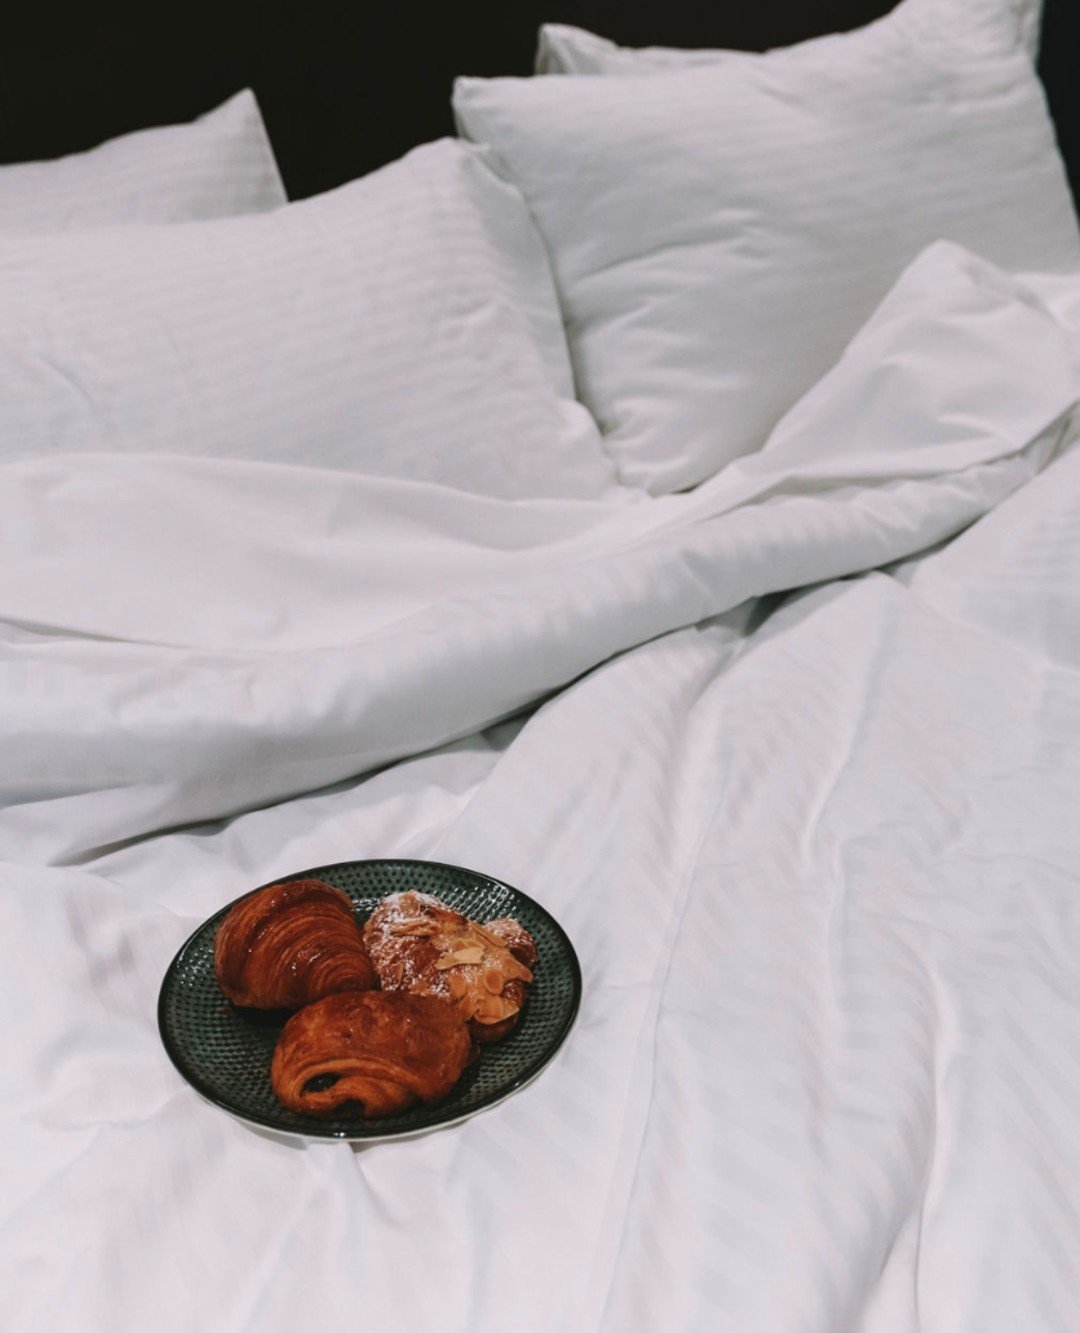 Is there anything more indulgent than breakfast in bed?

With our room service delivered straight to your door, you can savour every moment of the morning in the comfort of your own bed. It's the perfect way to start your day 🥐💫